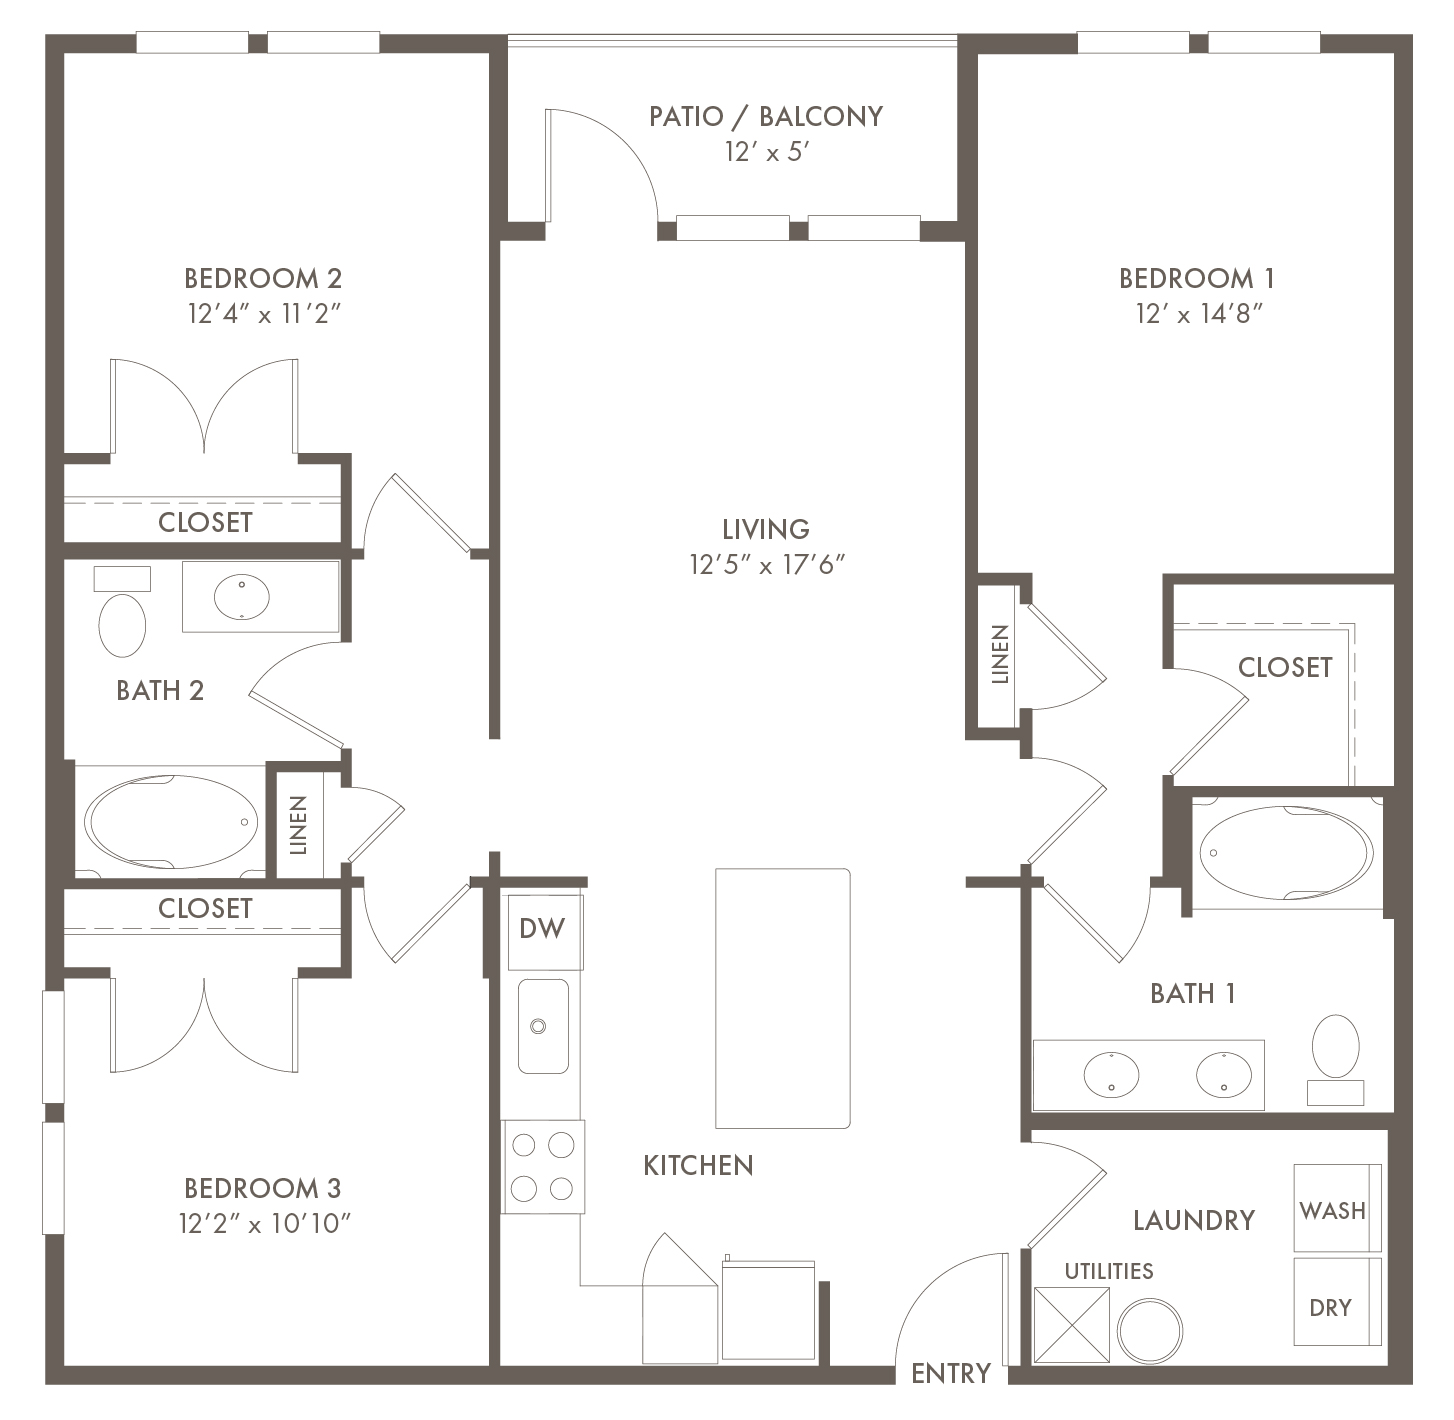 A C1 unit with 3 Bedrooms and 2 Bathrooms with area of 1,248 sq. ft